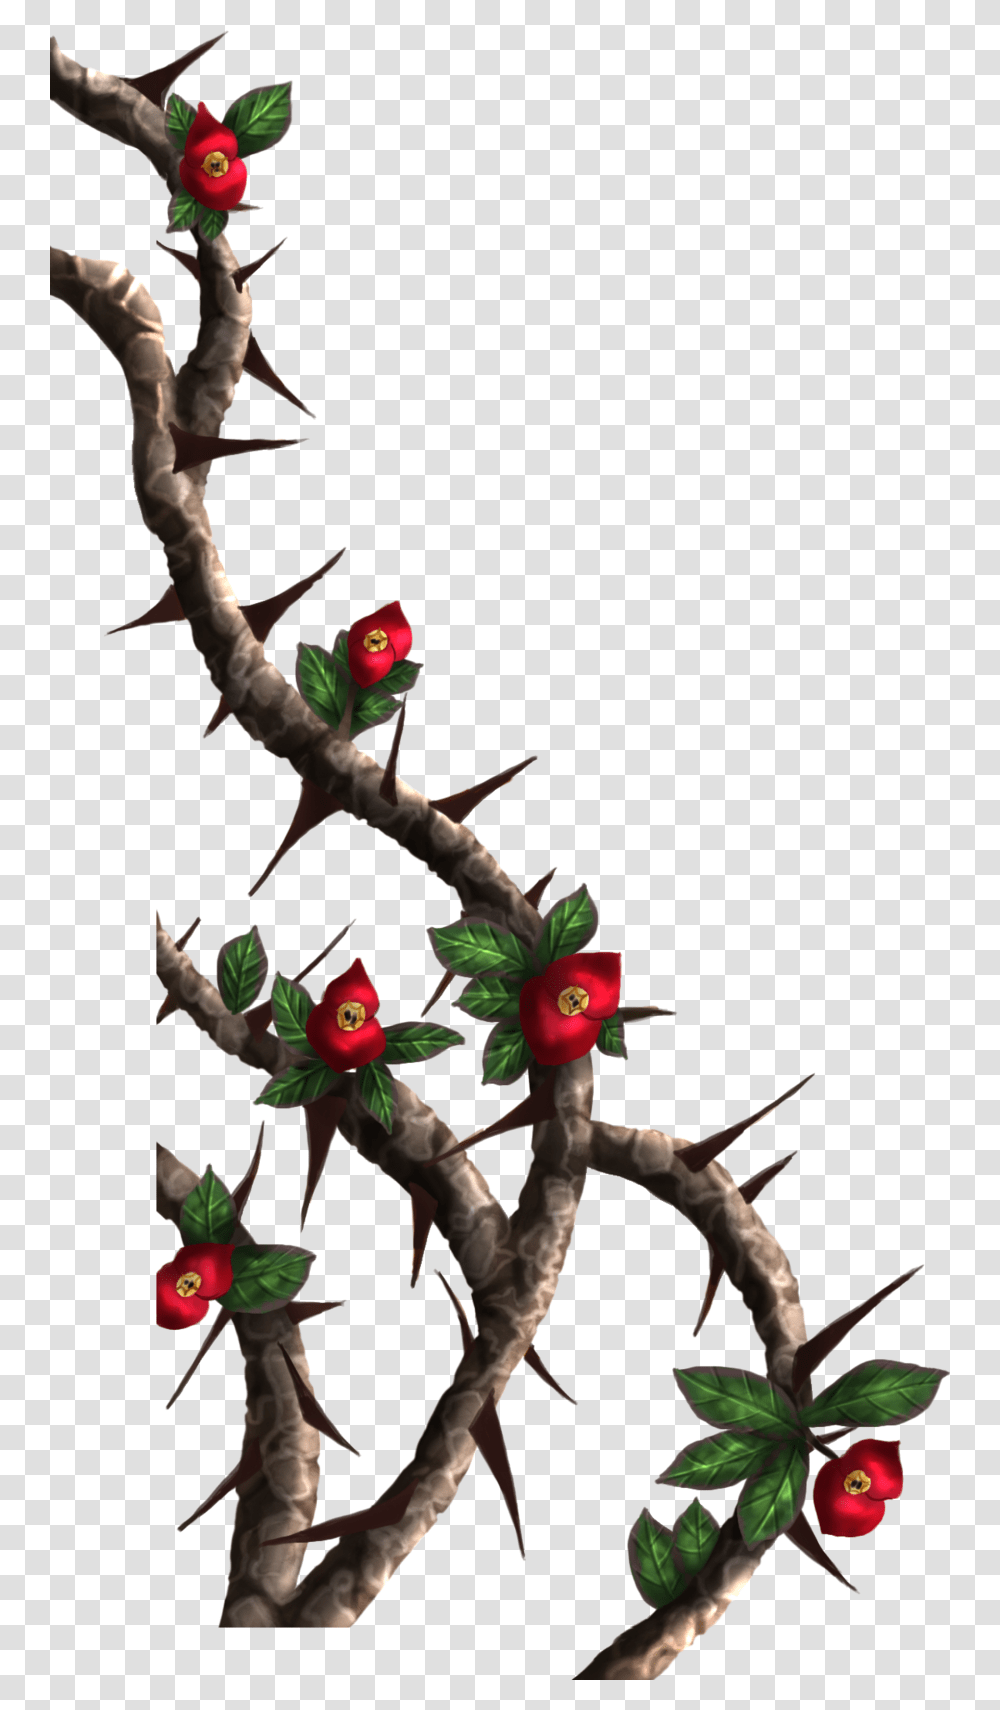 Drawings Of Roses With Vines And Thorns Crown Painted, Animal, Bird, Parrot, Bee Eater Transparent Png